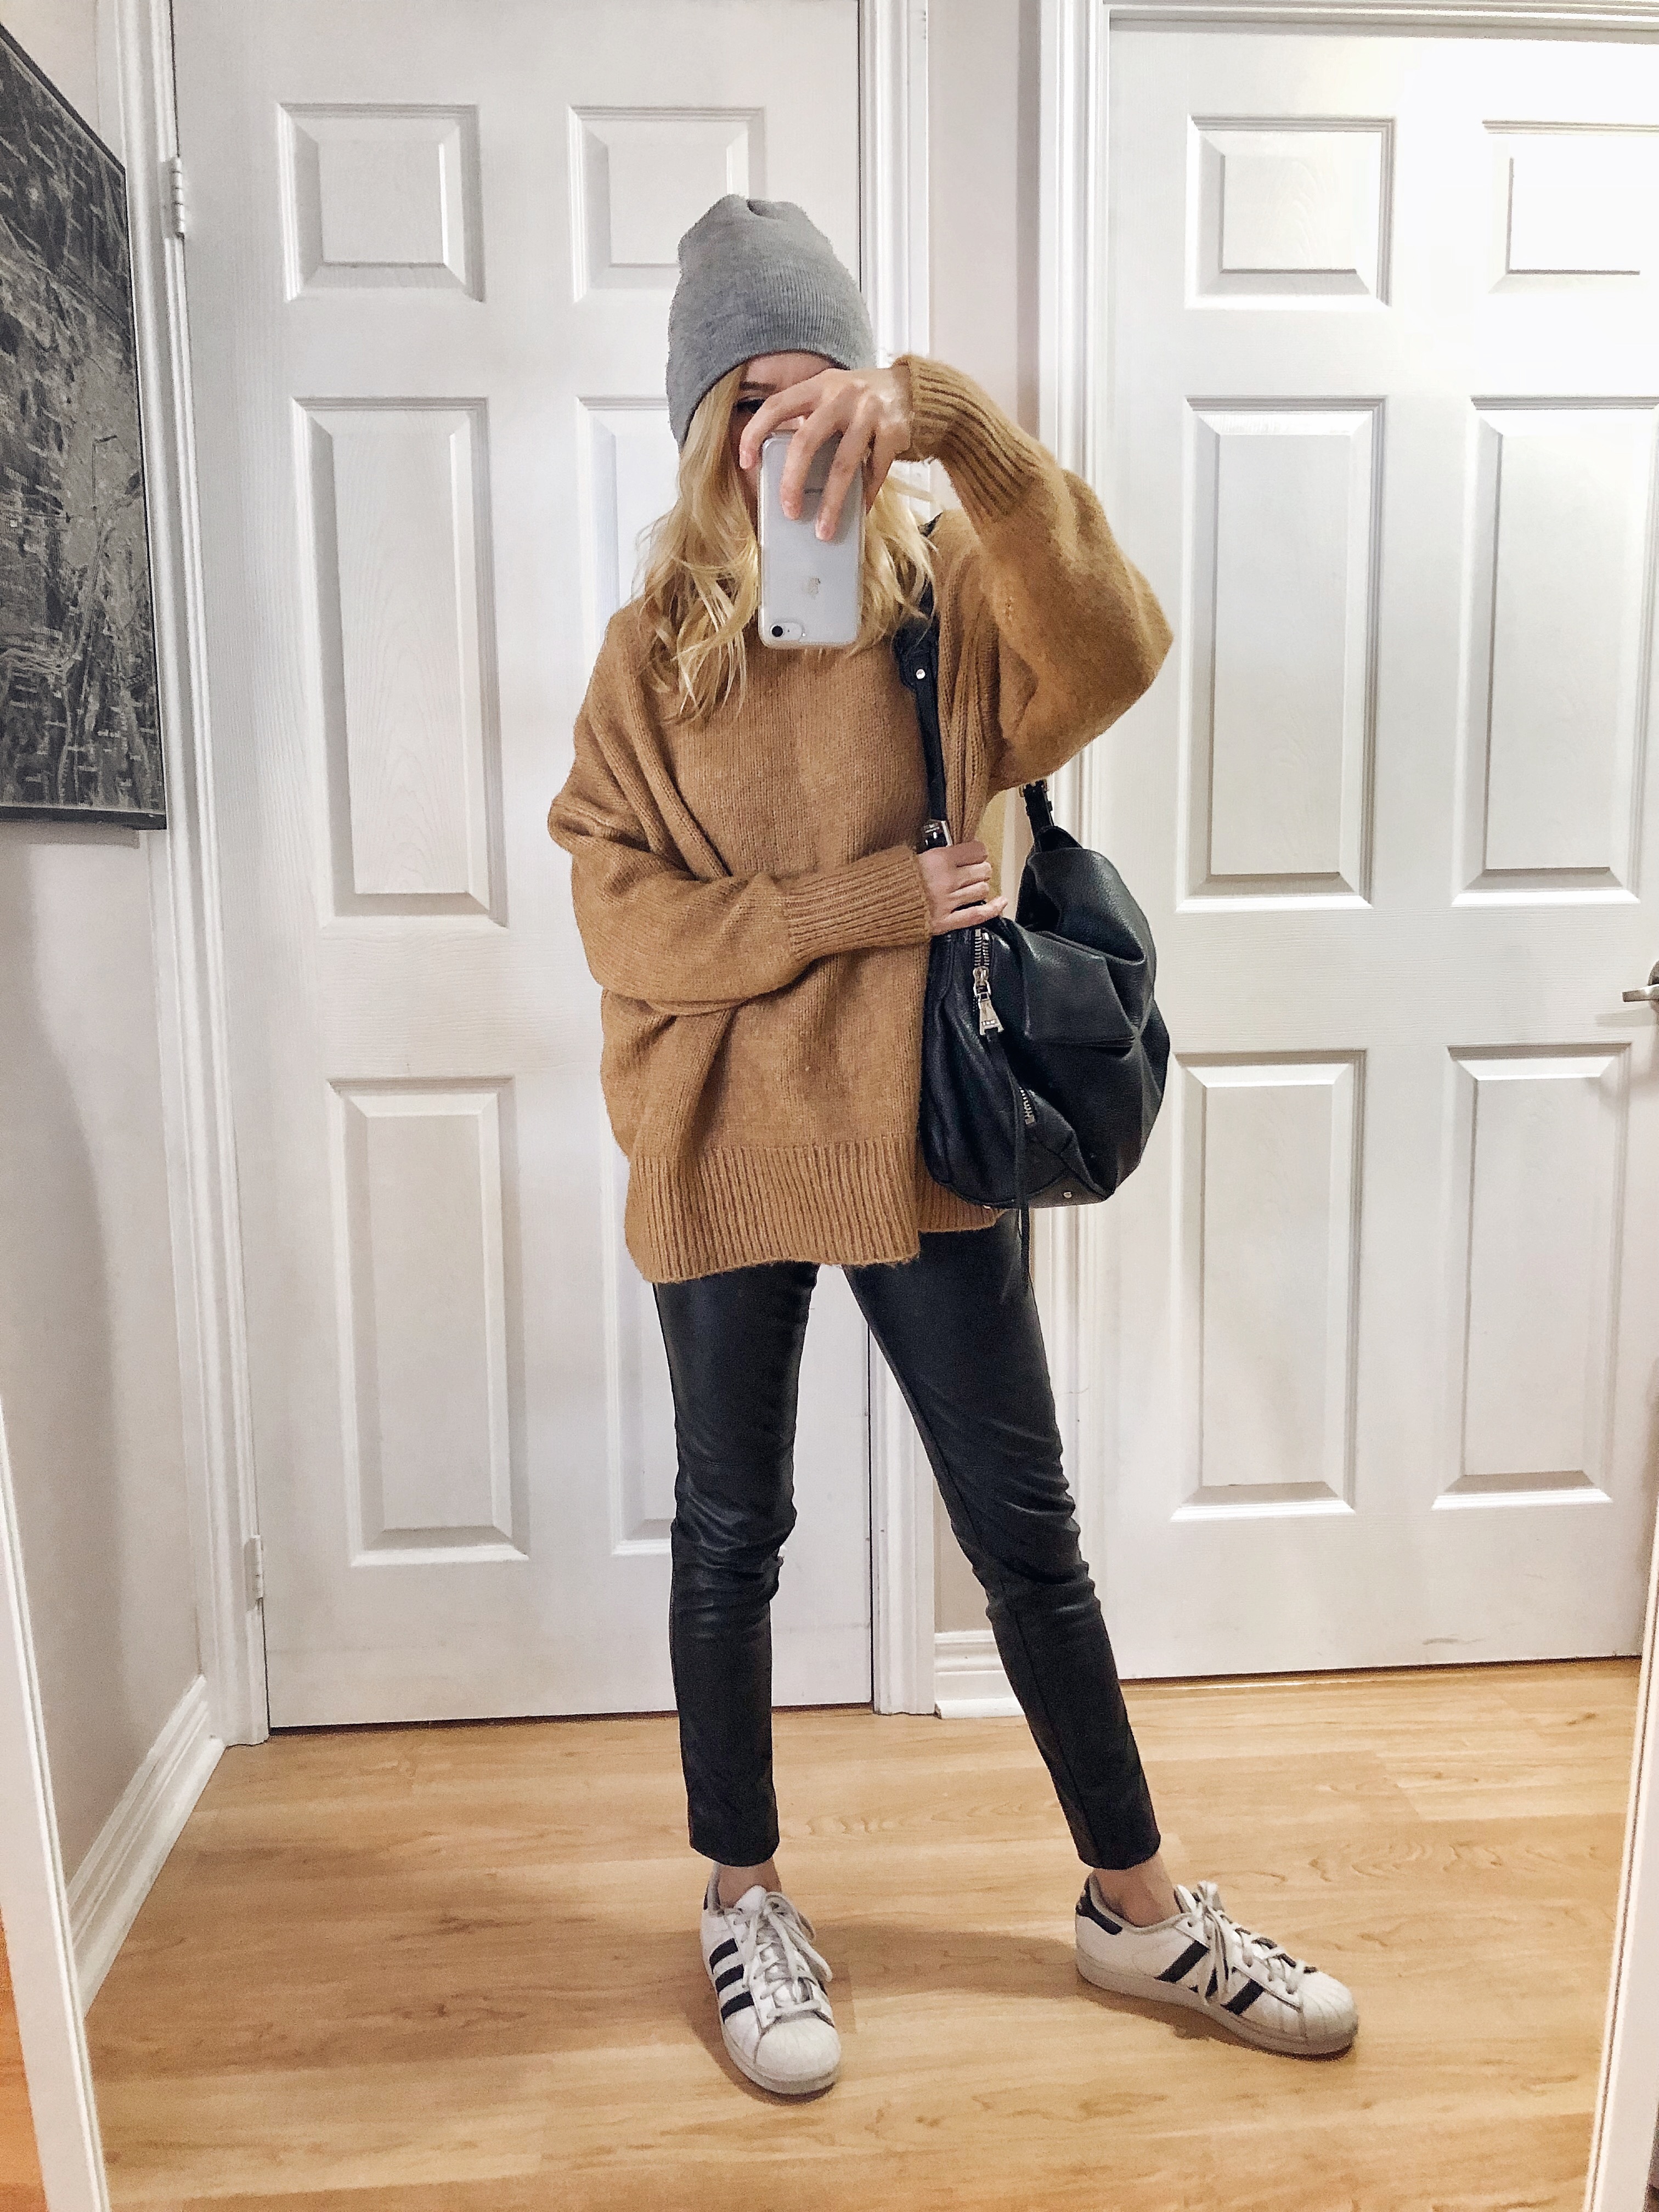 What I wore. I am wearing an oversized sweater, faux leather leggings, and Adidas